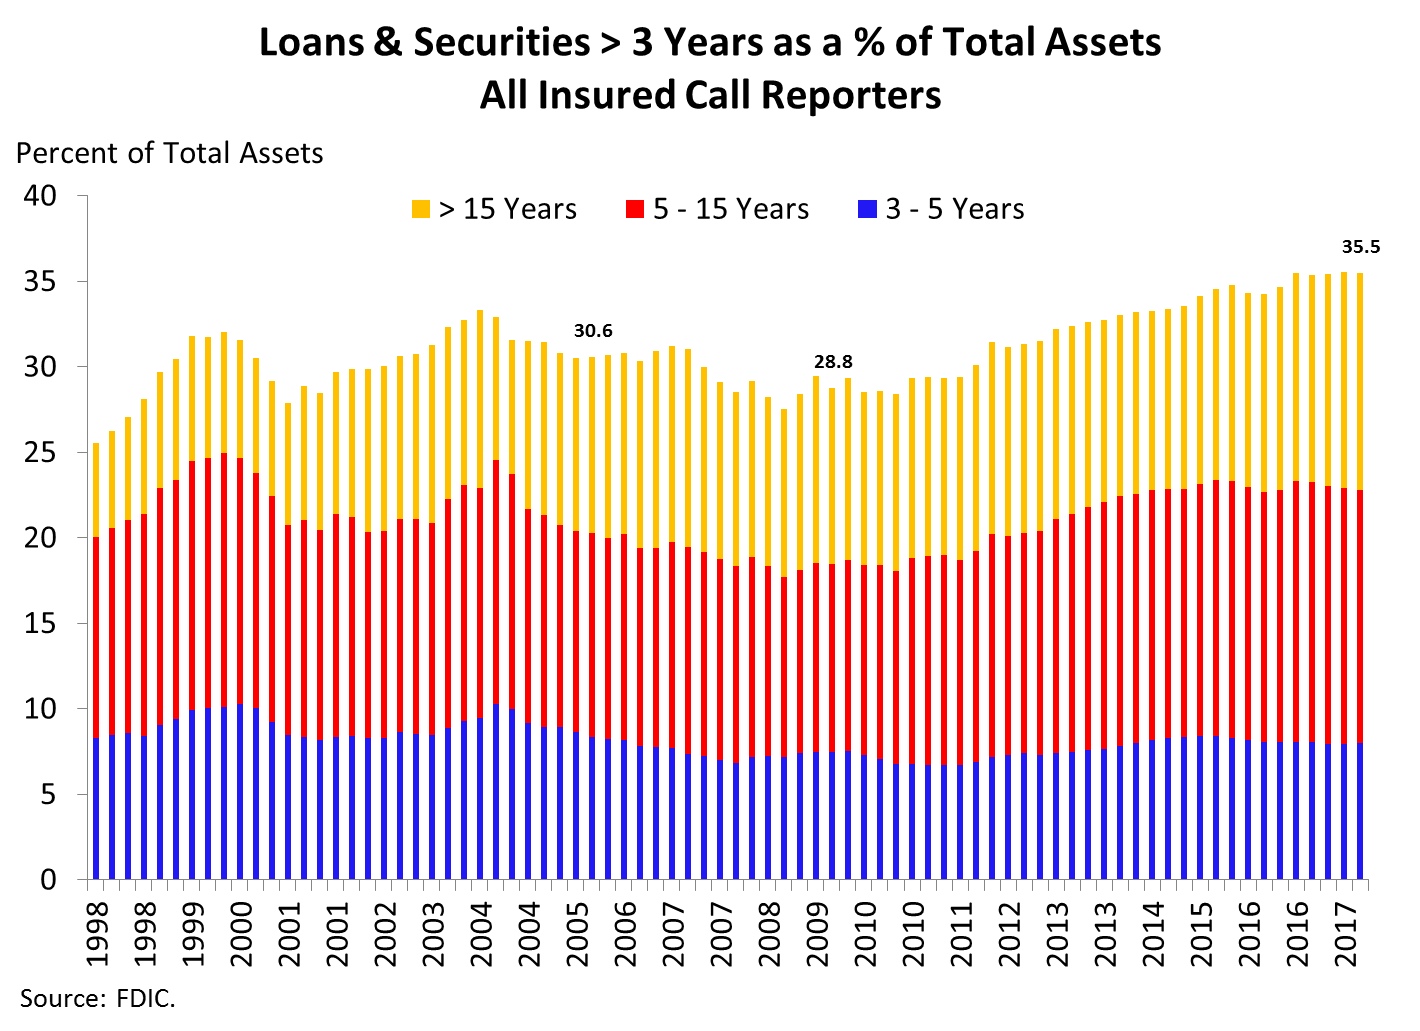 Chart 5: Loans & Securities > 3 Years as a % of Total Assets All Insured Call Reporters